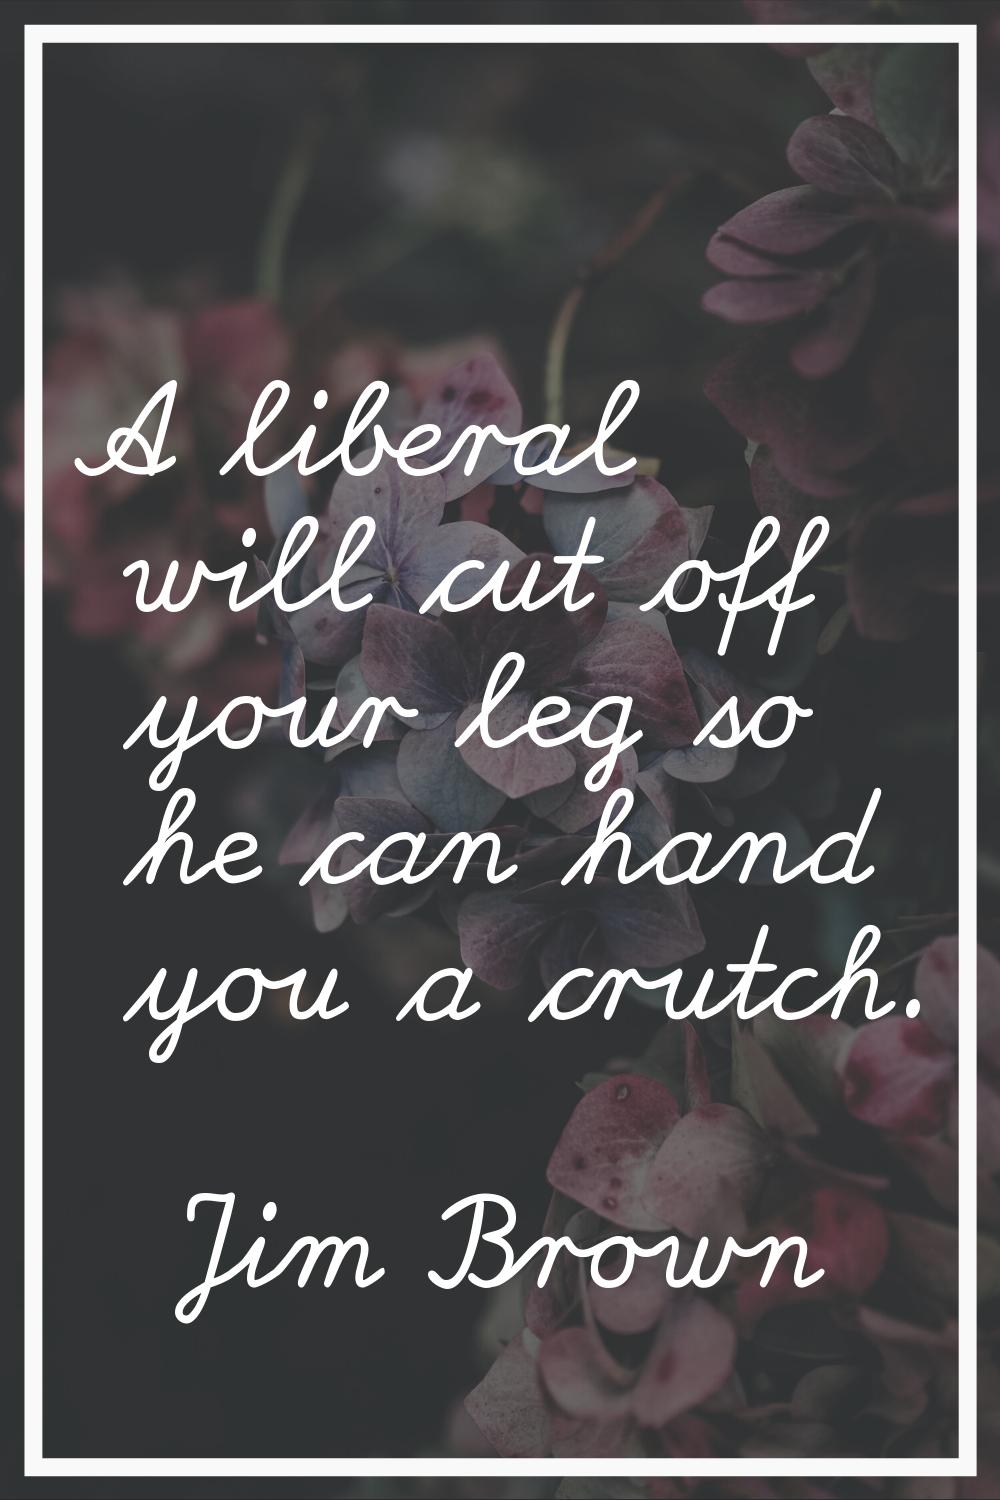 A liberal will cut off your leg so he can hand you a crutch.